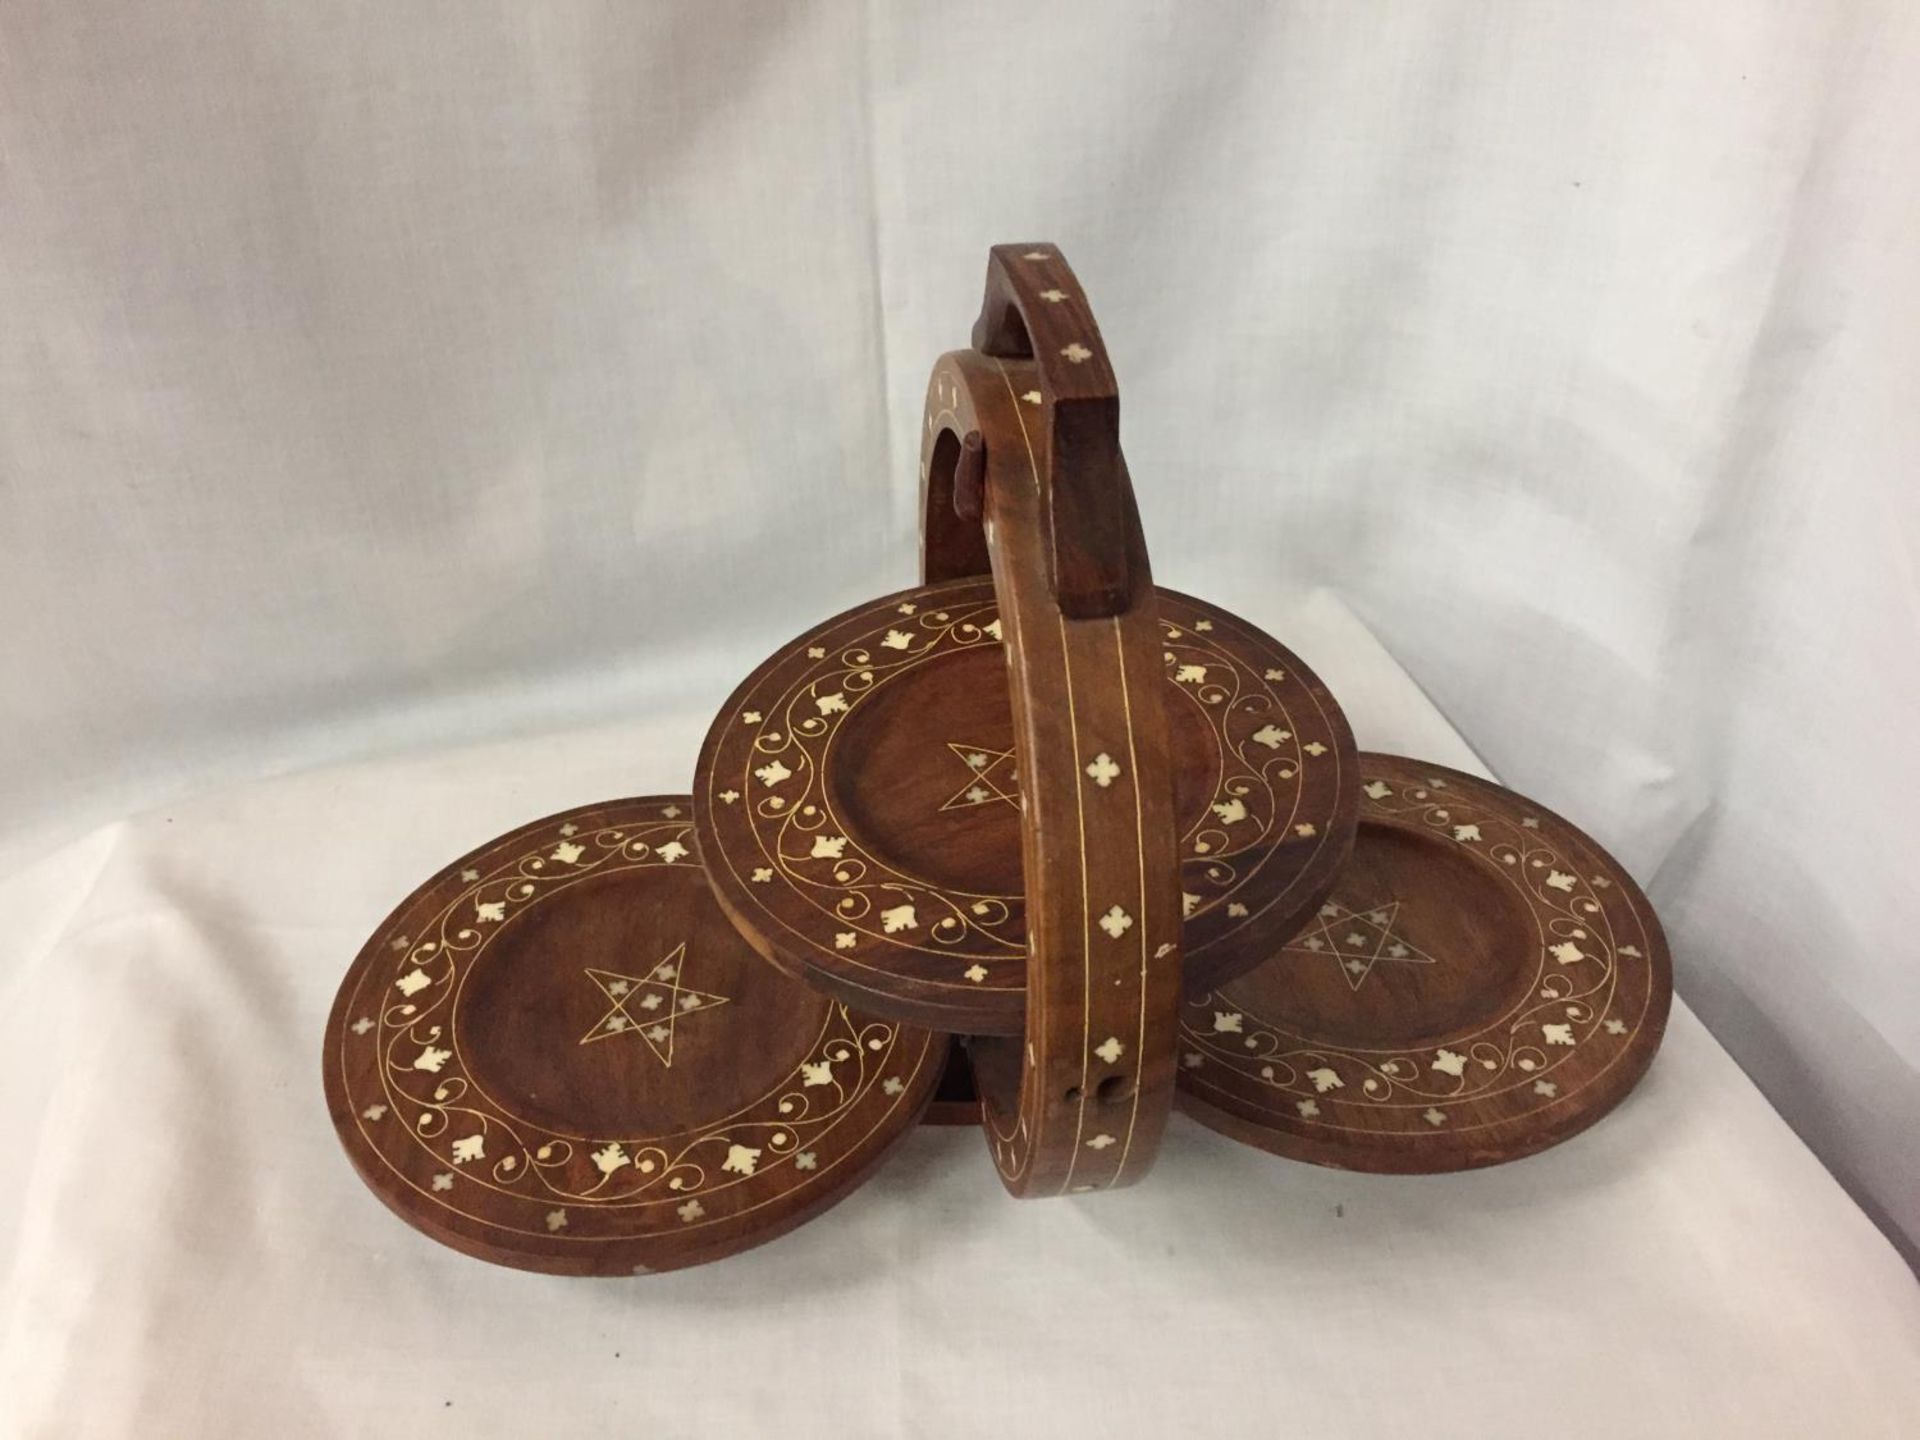 A THREE TIER INLAID MAHOGANY COLLAPSIBLE CAKE STAND